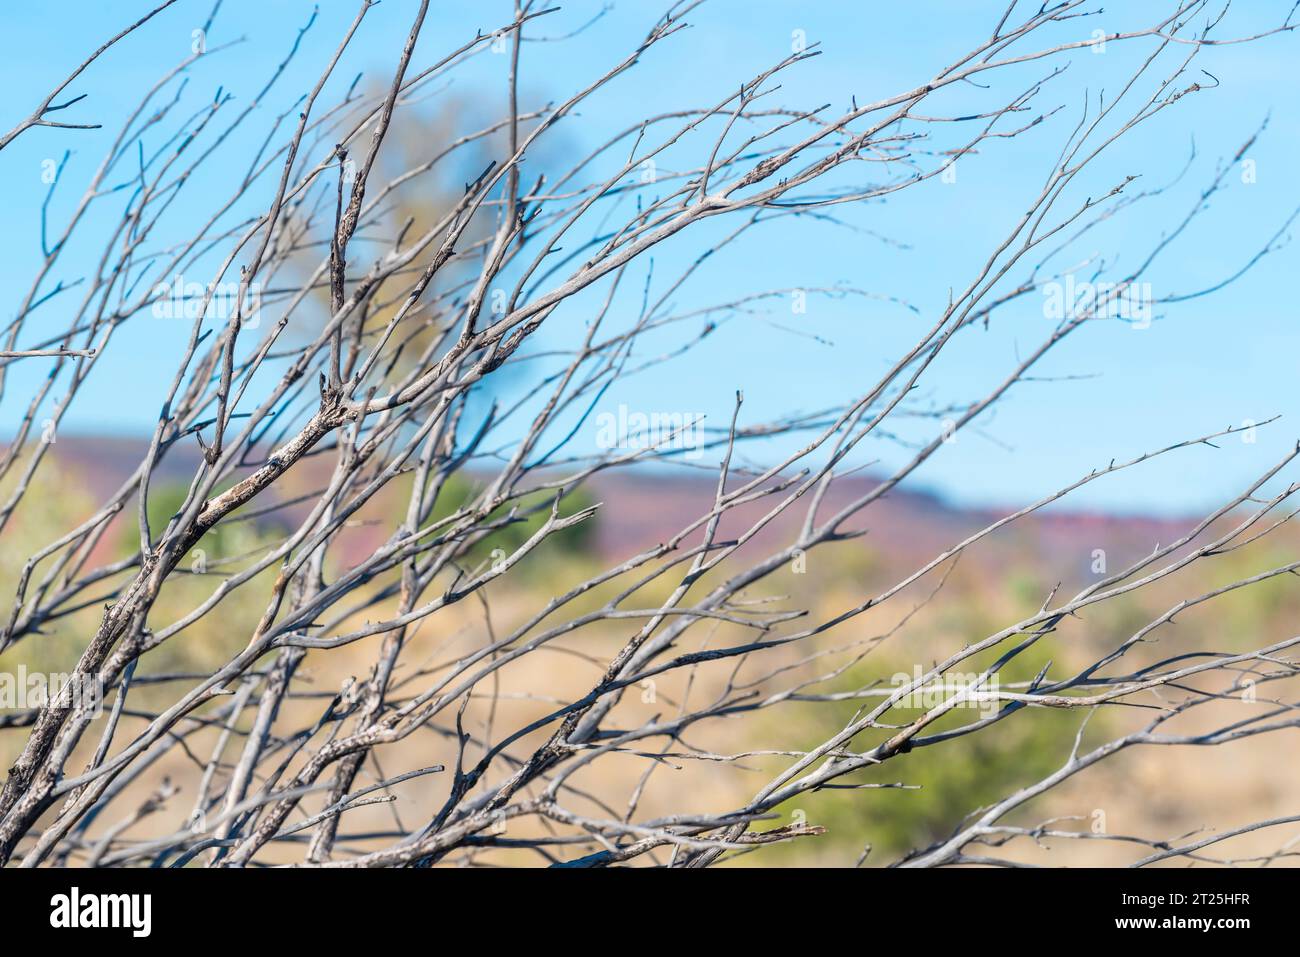 Thin branches of a Mulga wood tree with a blurred background of the George Gill Range in the Northern Territory of Australia near Kings Canyon Stock Photo